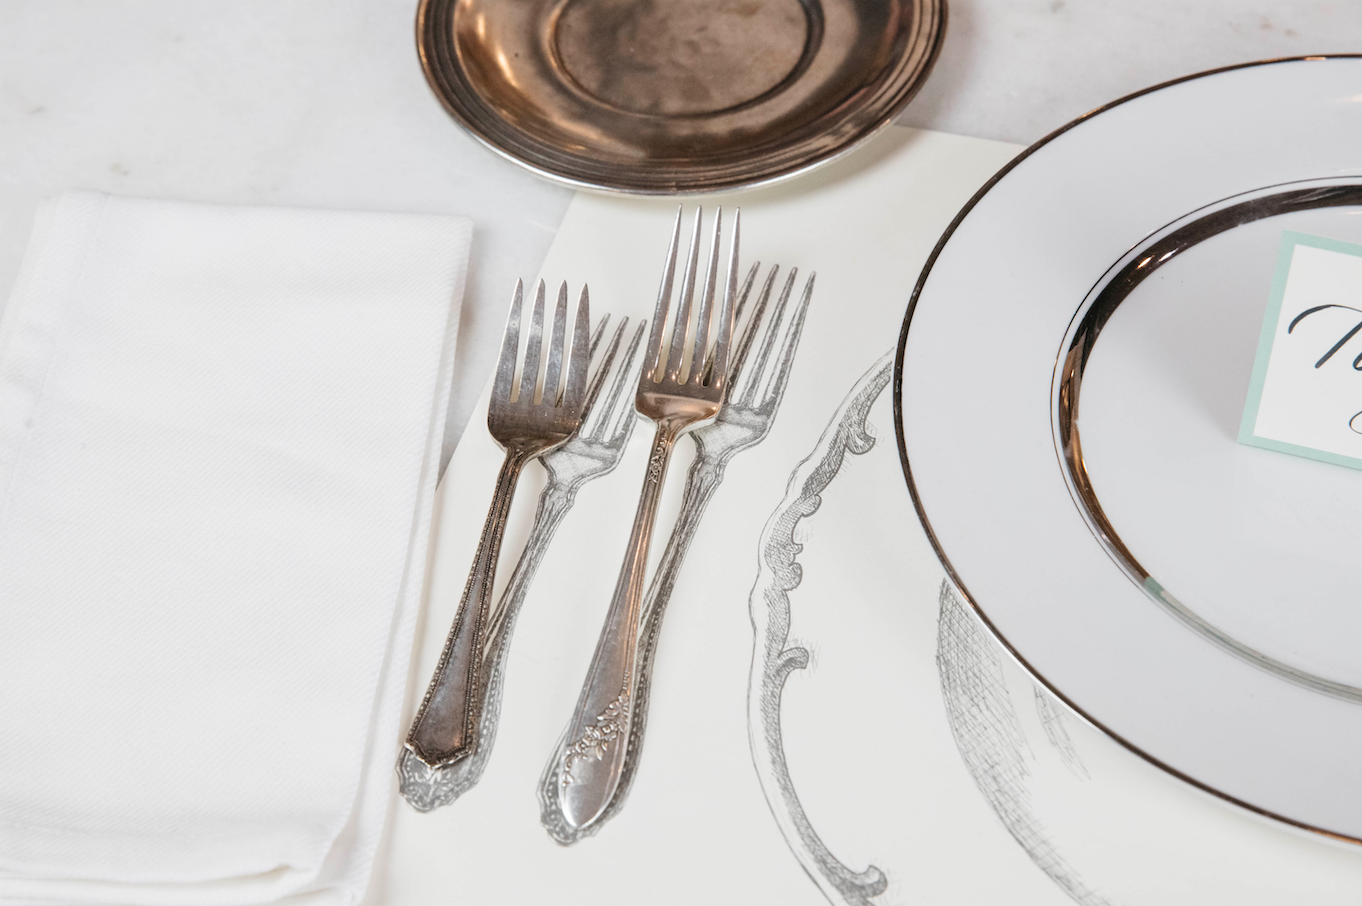 How To Create A Place Setting